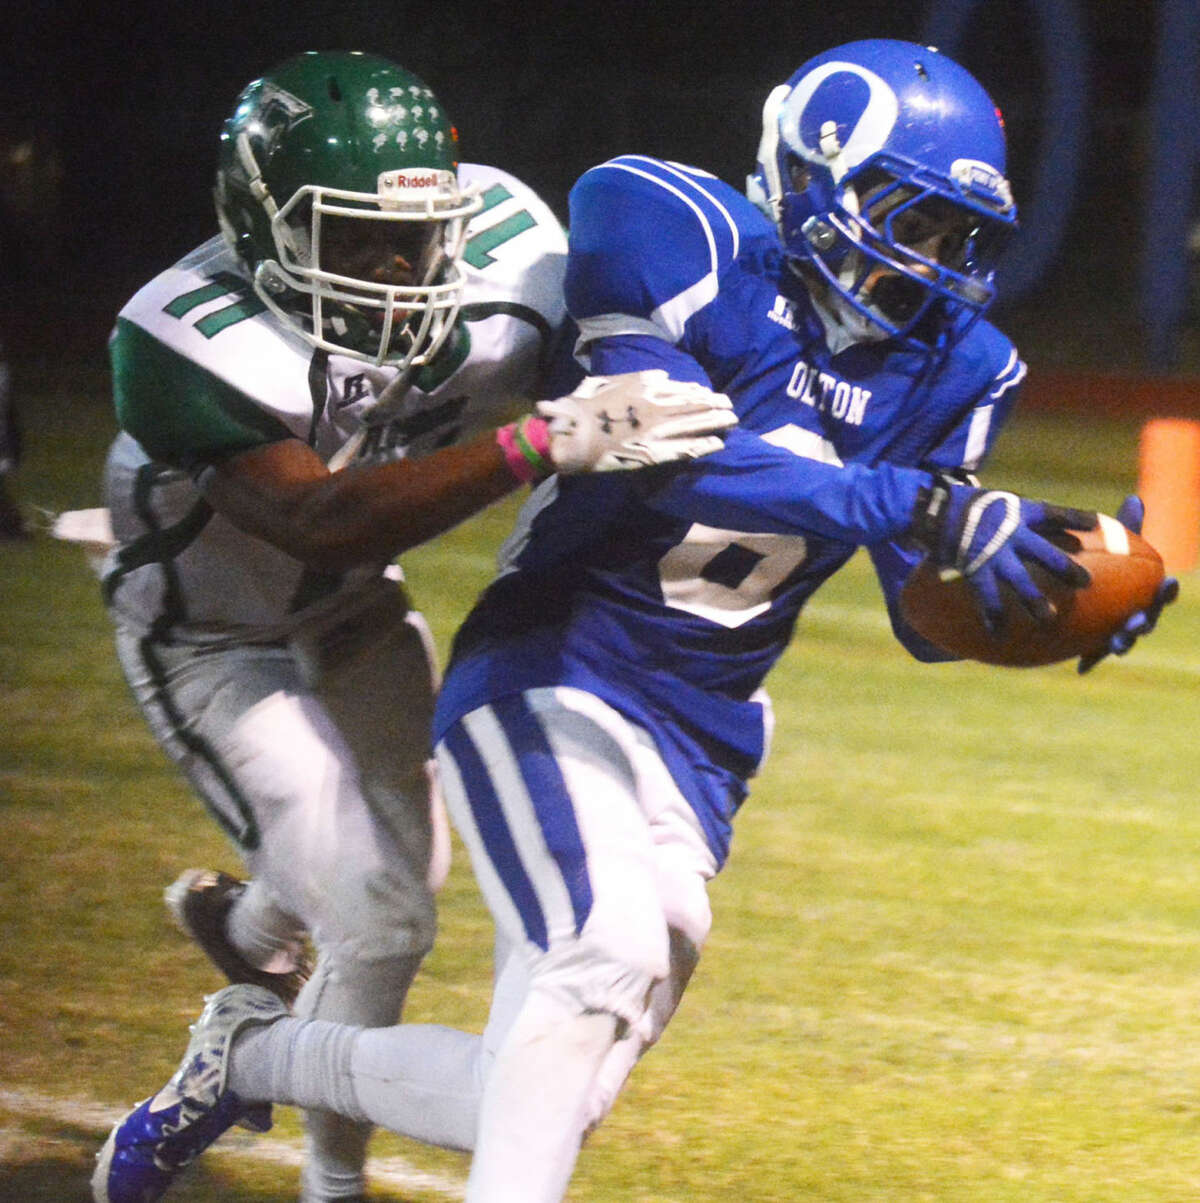 Olton's Bryan Valencia (6) tries to escape the grasp of Floydada's Kyi Baker (11) during a game earlier this season. Valencia has been moved from receiver to running back and has helped spark the Mustangs the past two weeks. Olton and Hale Center play Friday night with the winner qualifying for the playoffs.